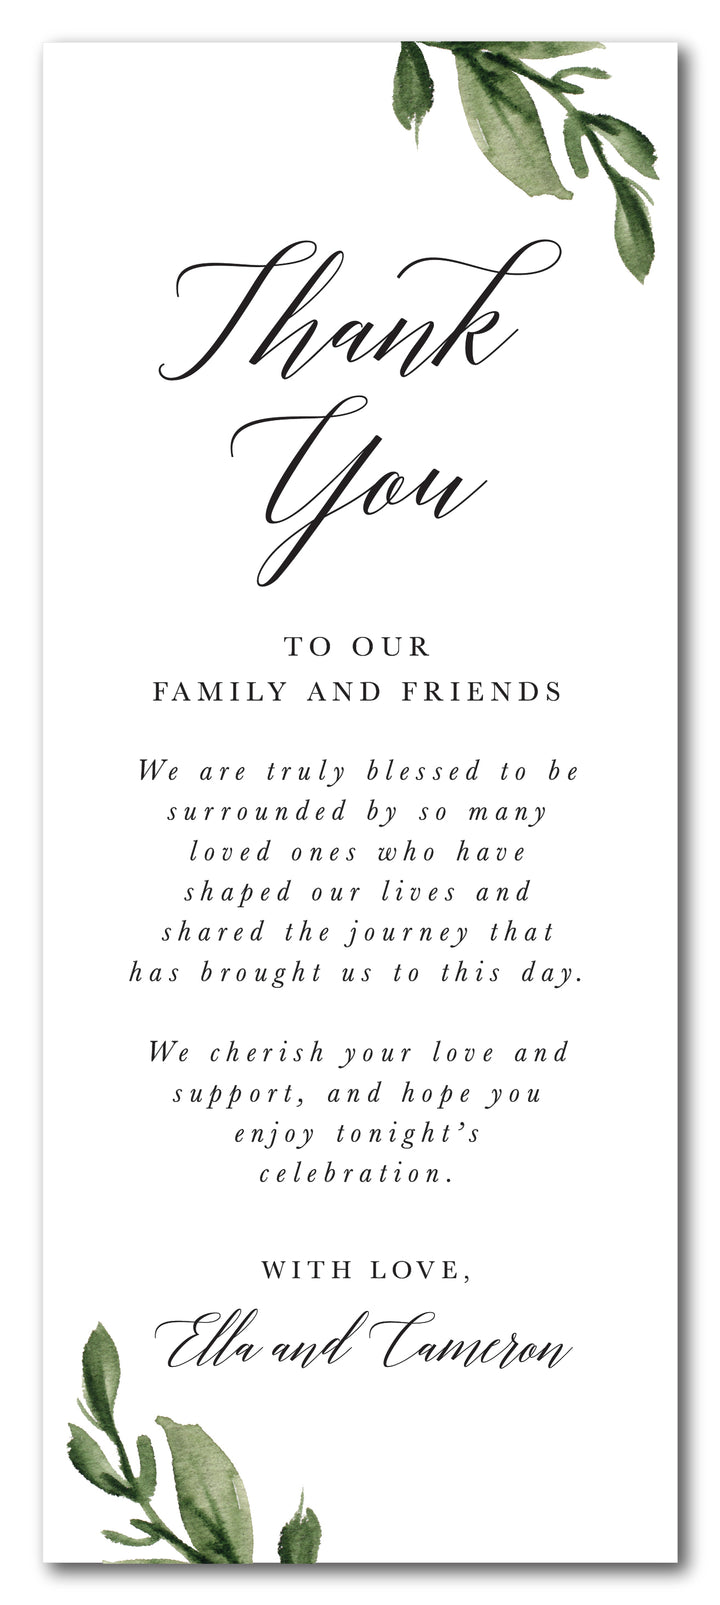 The Ella Thank You Place Setting Card